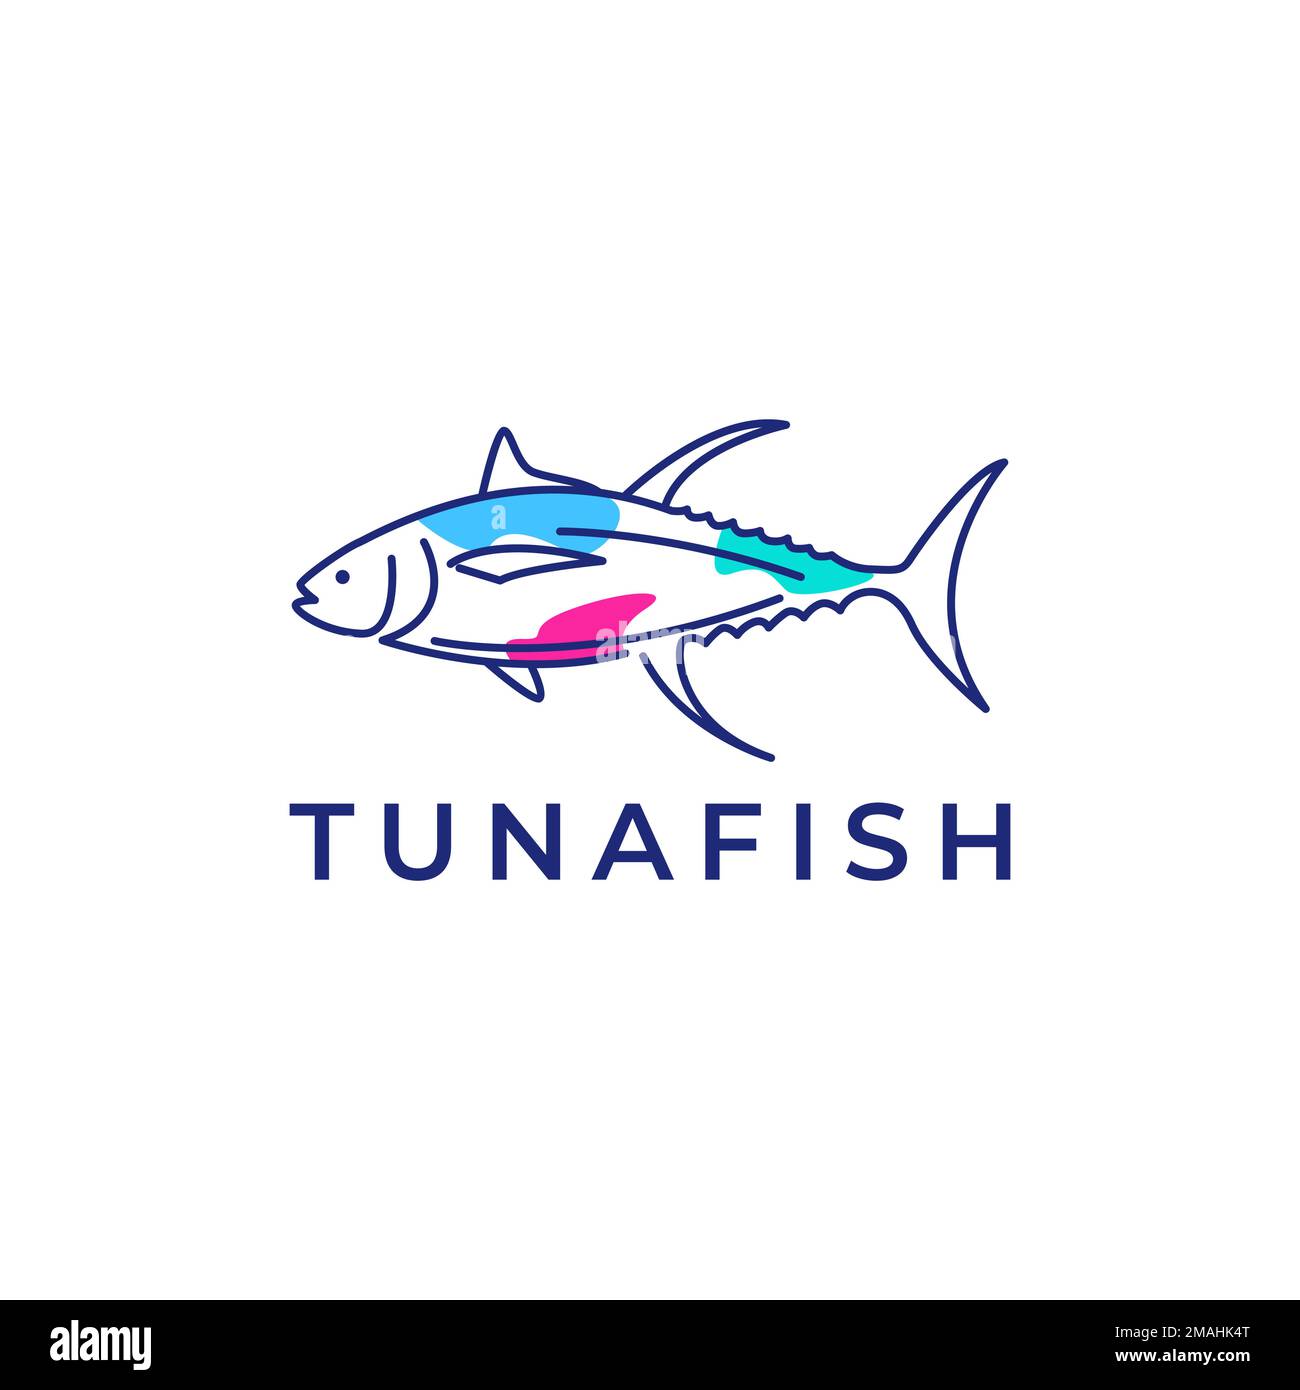 good food tuna fish delicious catching fishing ocean abstract logo design vector icon illustration template Stock Vector